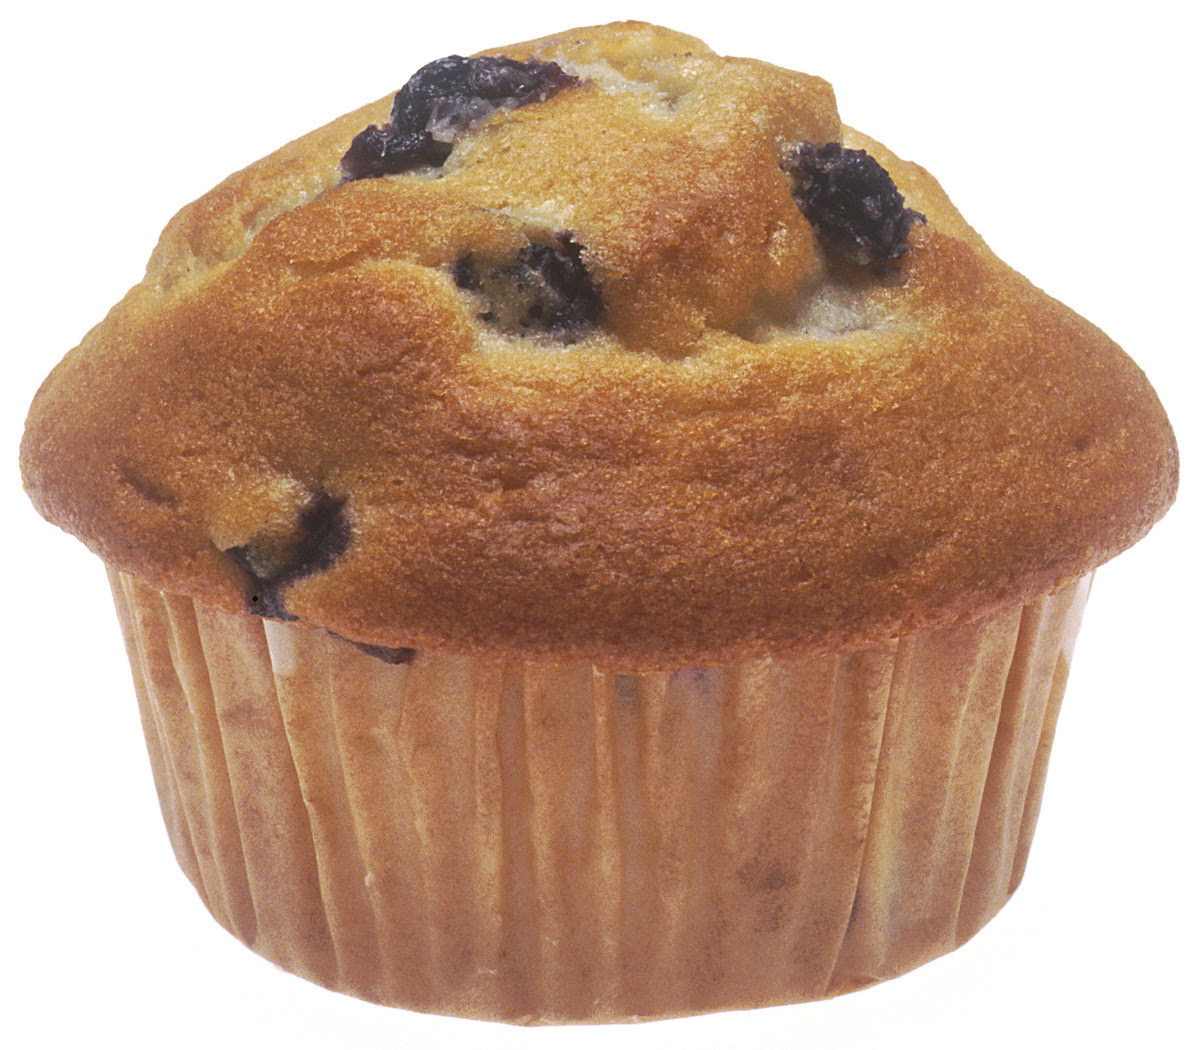 muffin large